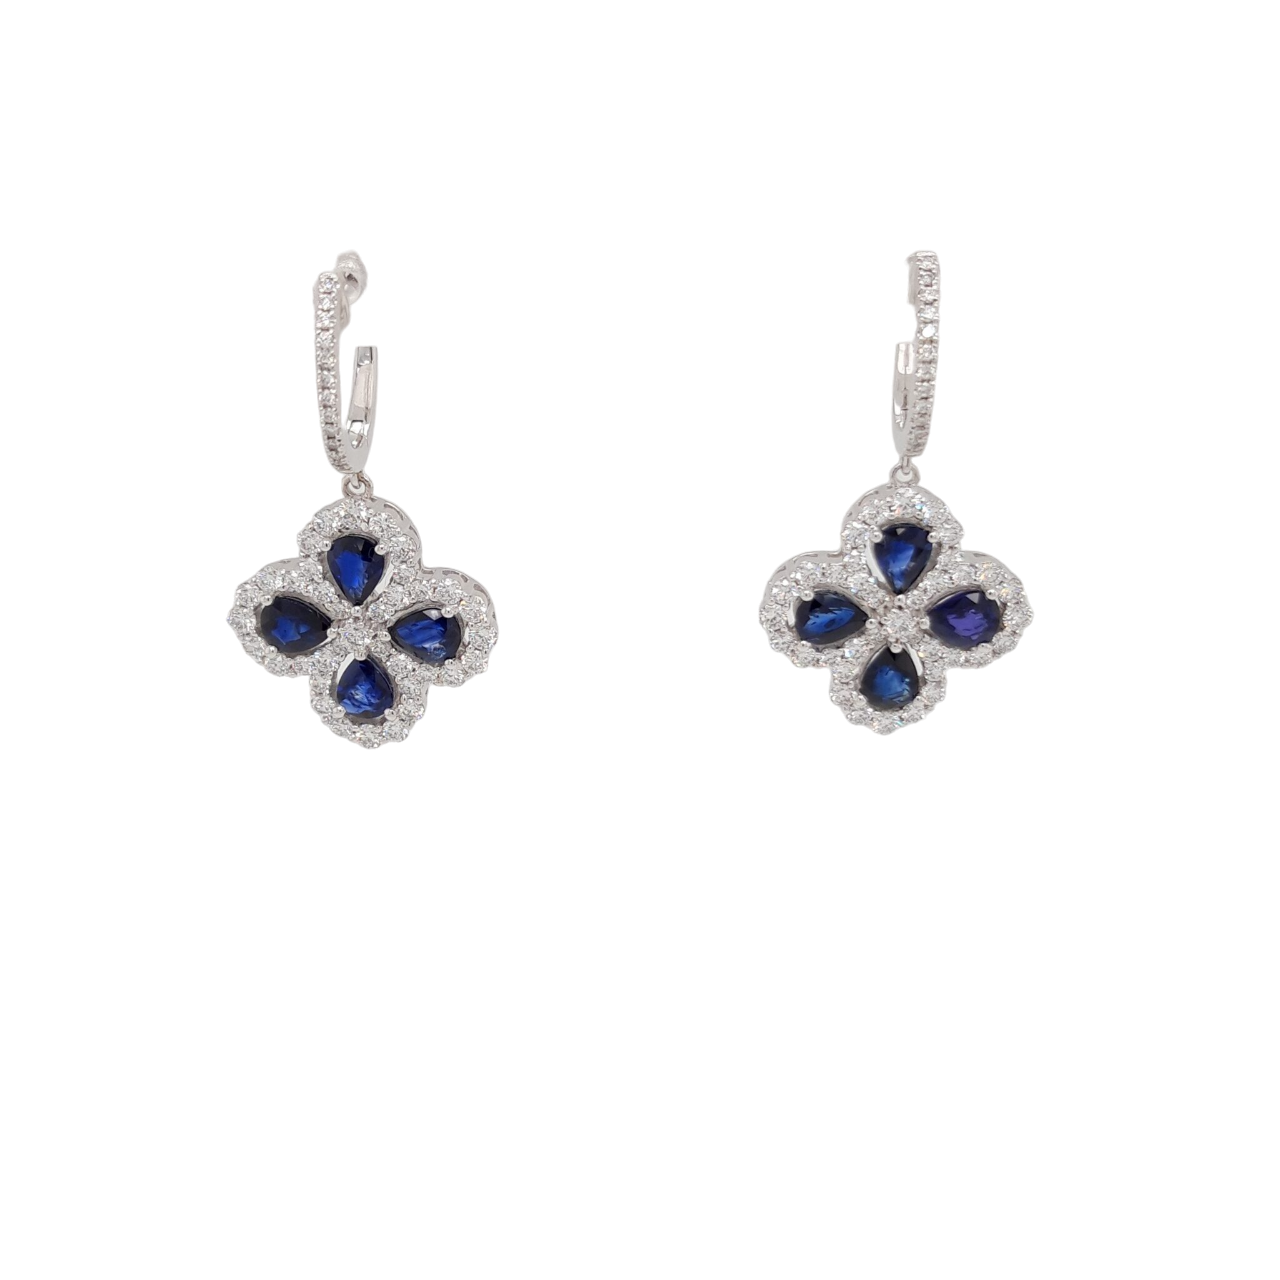 Ladies Diamond and Sapphire Flower Earrings 3.31 Carats